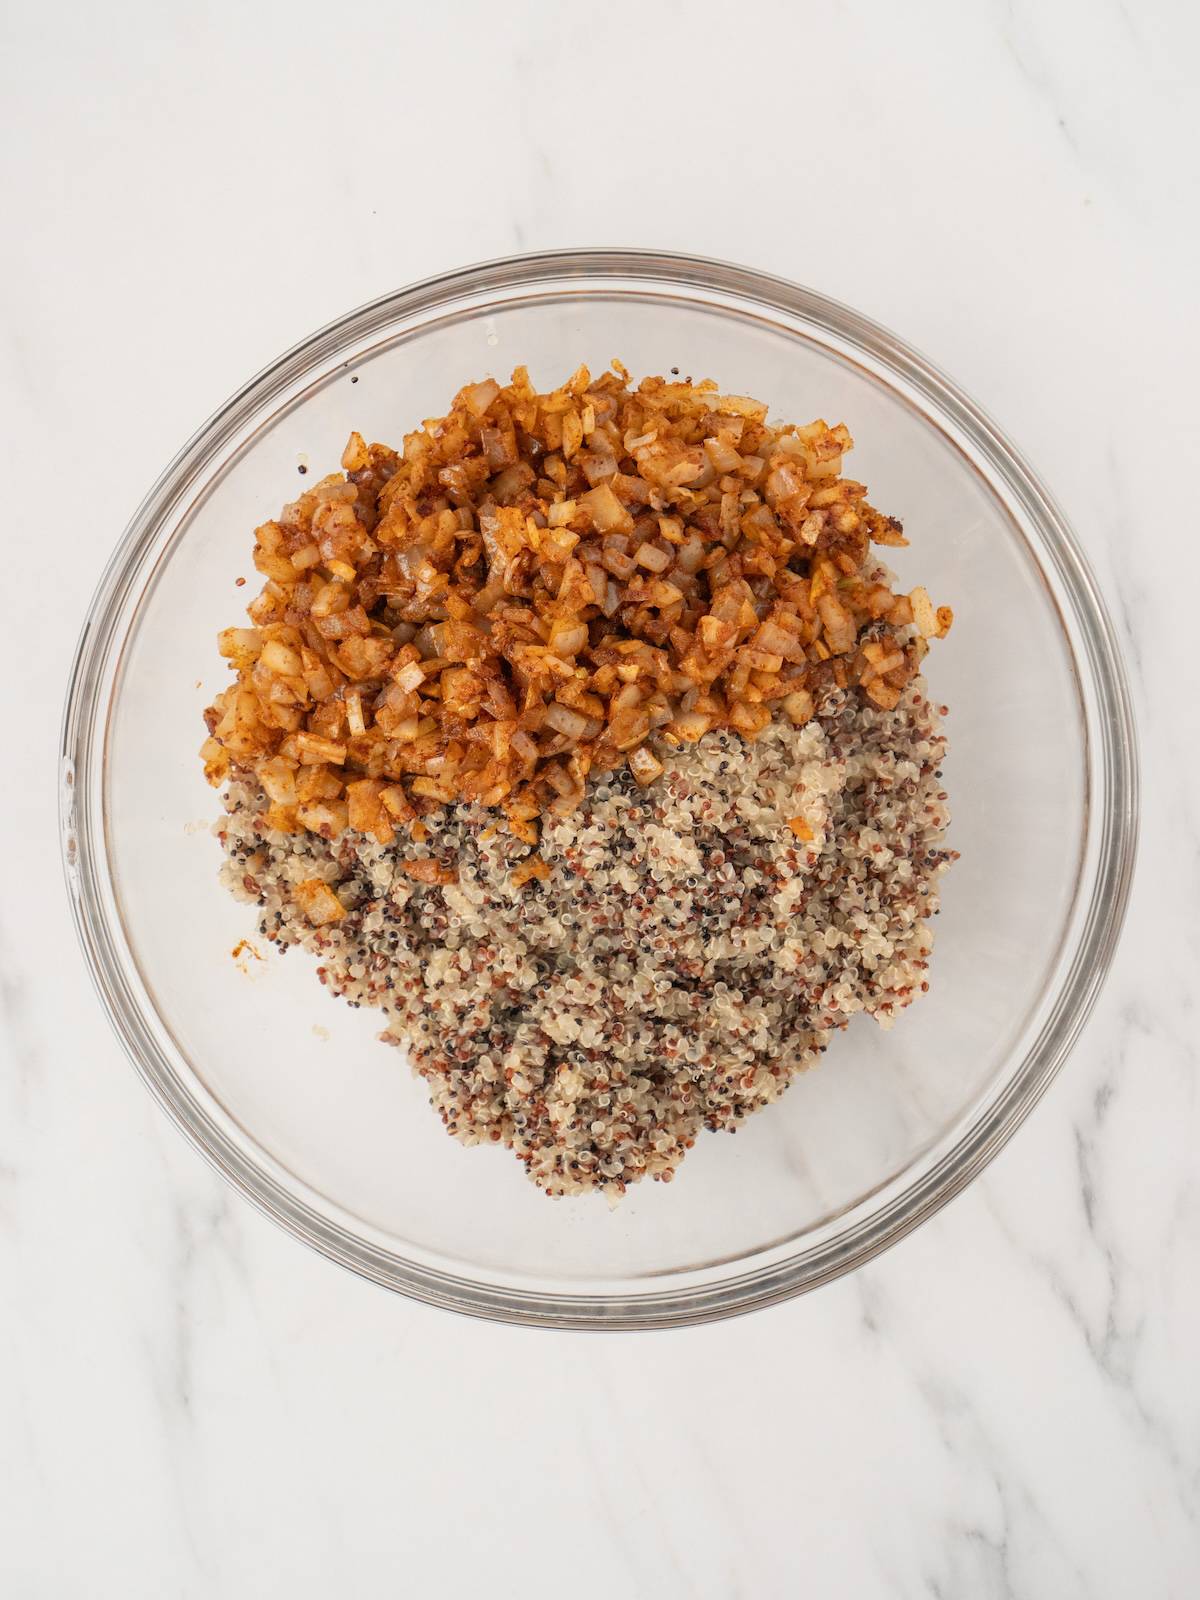 A large glass mixing bowl with cooked quinoa and seasoned sautéed onions.